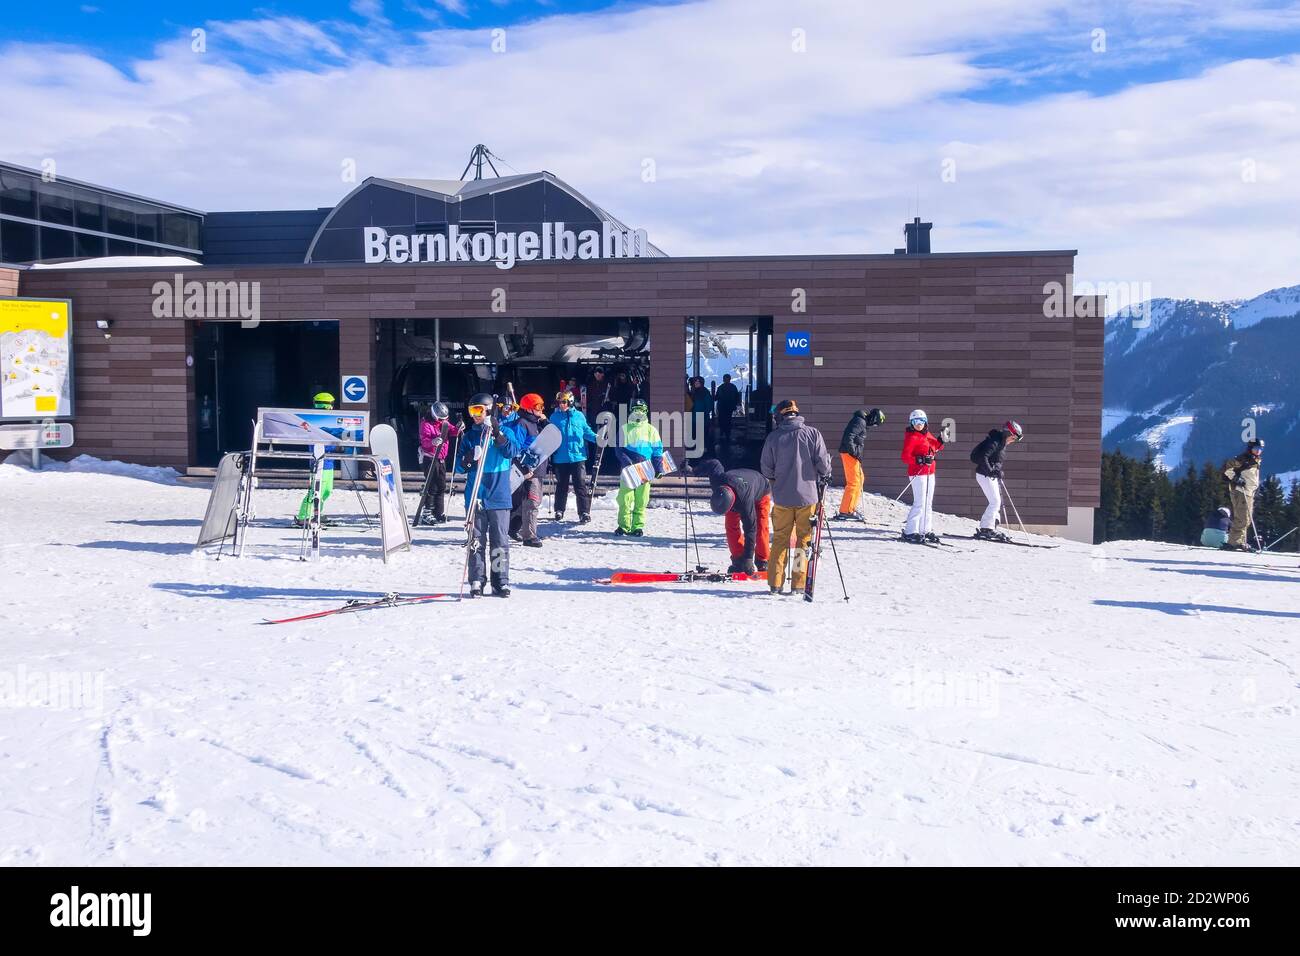 Saalbach, Austria - March 1, 2020: People going skiing from cable car ski lift Bernkogelbahn station Stock Photo